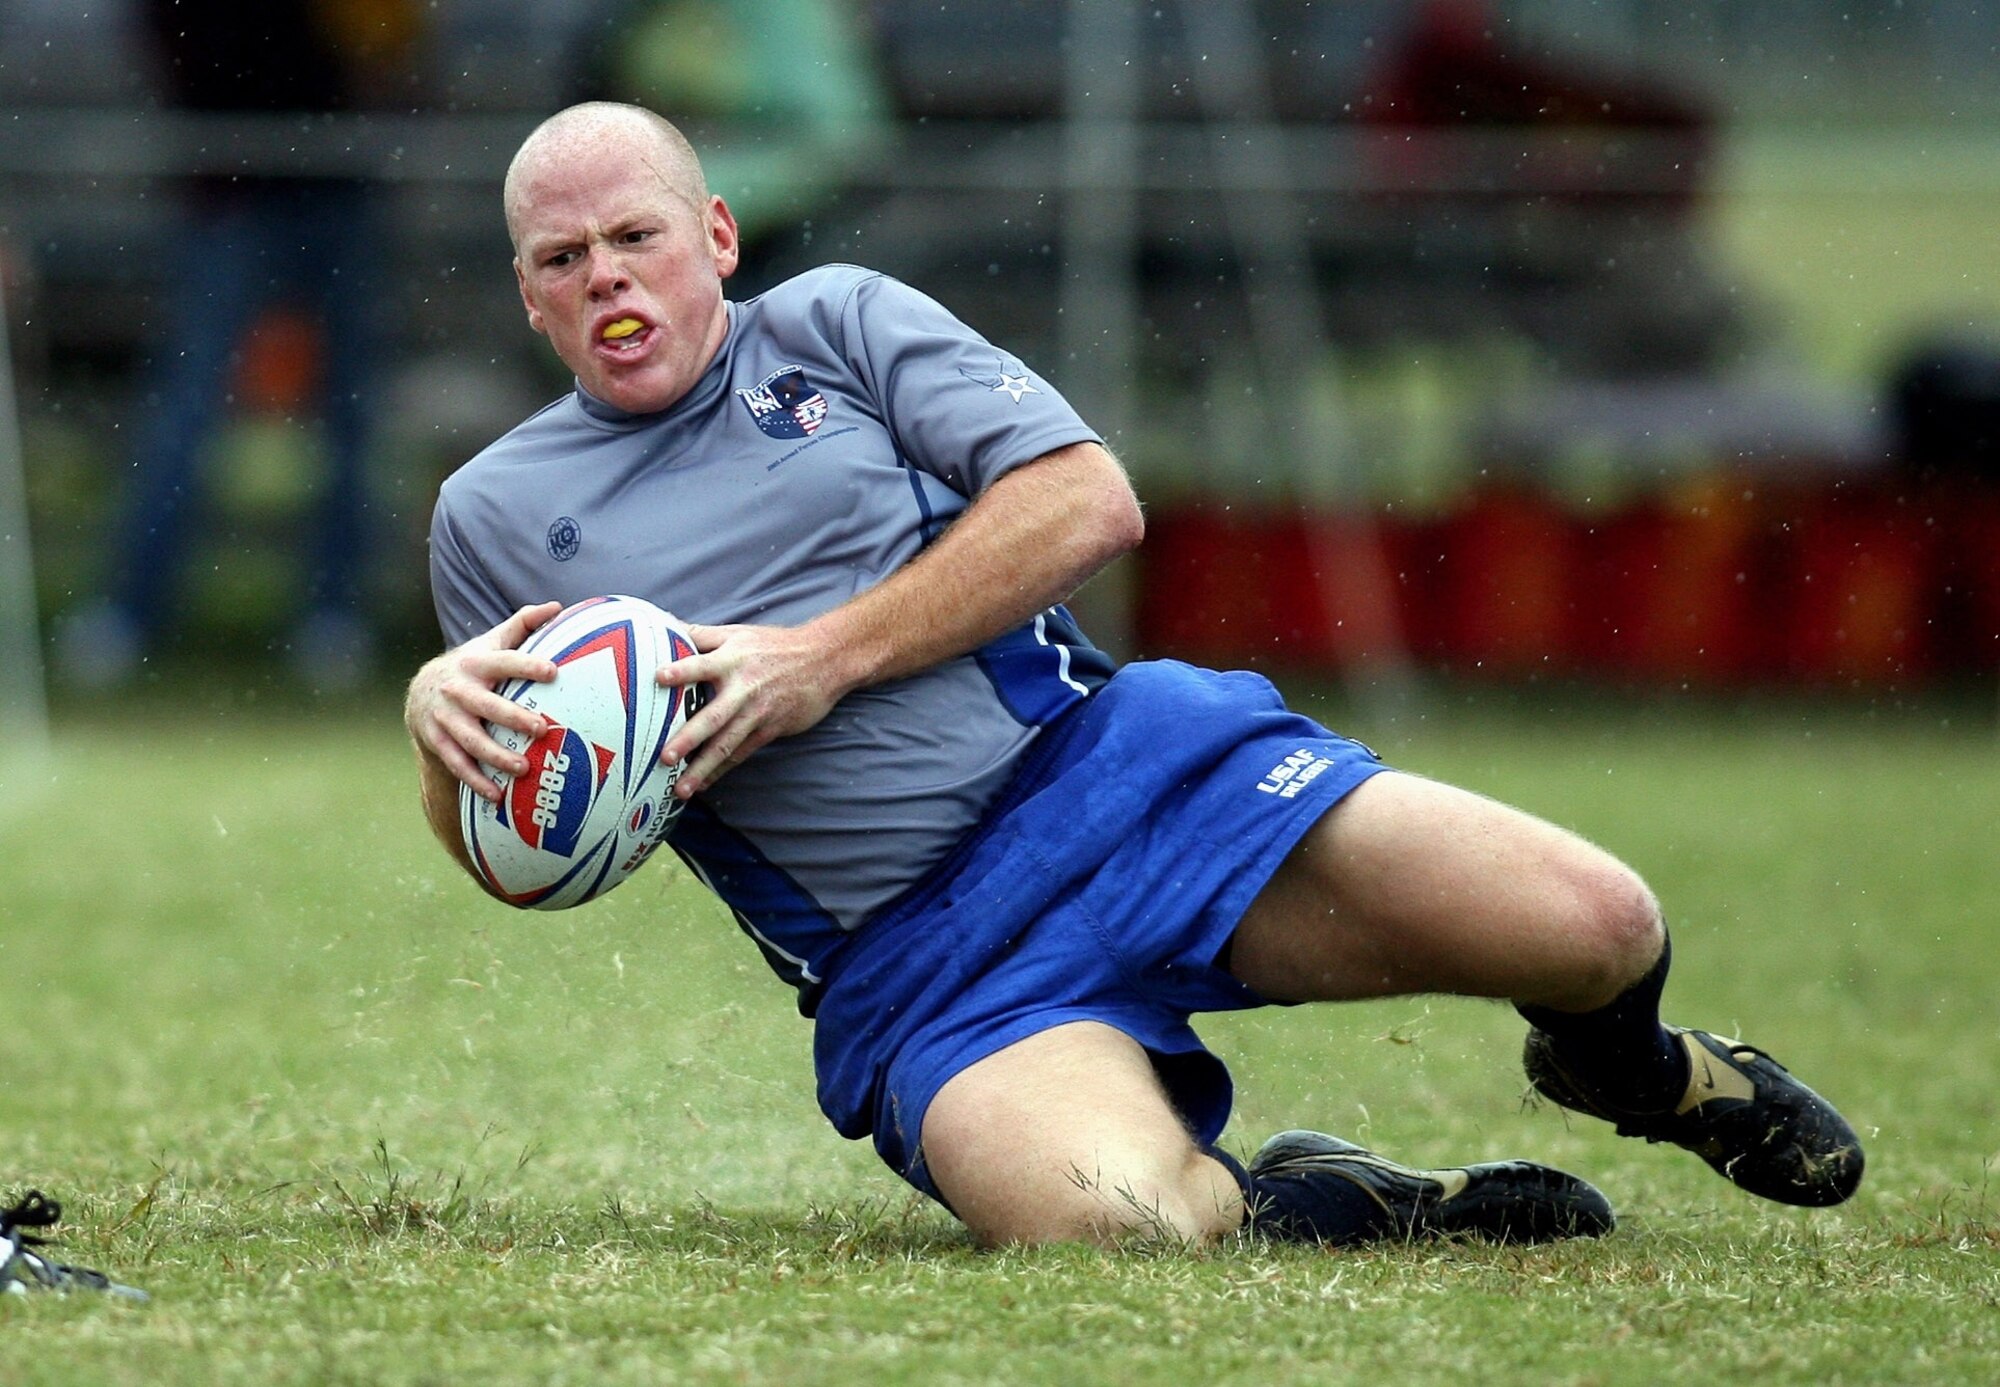 Senior Airman James Hubby scores against the Marine Corps during the final Armed Forces Rugby Championship match Oct. 27 at Camp Lejeune, N.C.  Air Force beat the Marines 38-3 to win their third straight Armed Forces championship.  (U.S. Air Force photo/Major Scott Foley)